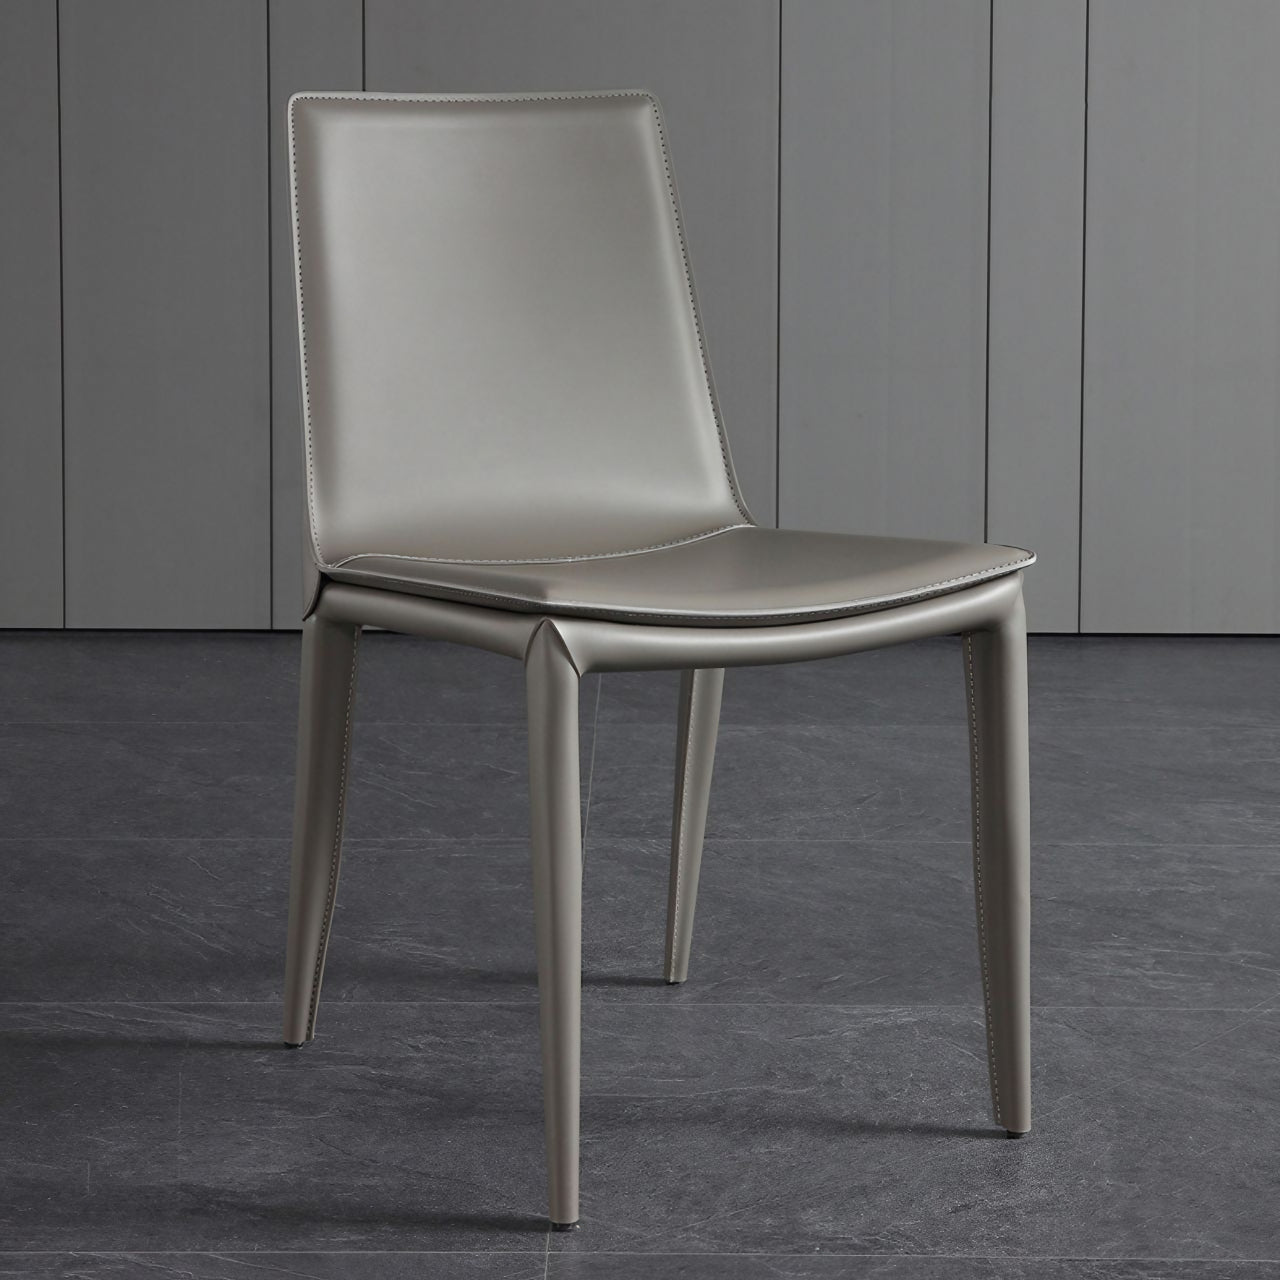 Minimalist luxury gray saddle leather dining chair with carbon steel frame